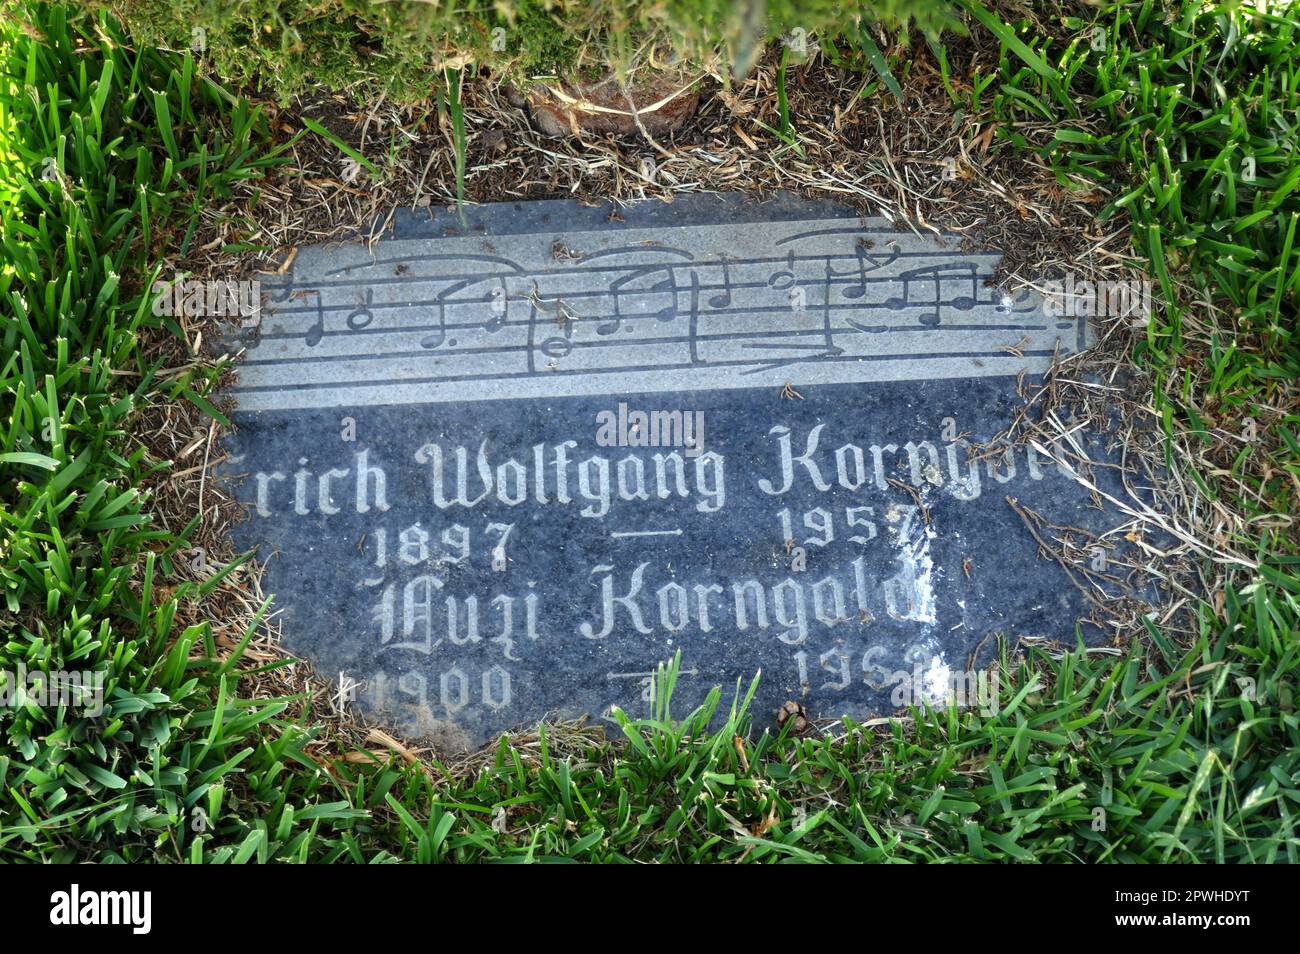 Los Angeles, California, USA 29th April 2023 Composer Erich Wolfgang Korngold Grave in Garden of Legends at Hollywood Forever Cemetery on April 29, 2023 in Los Angeles, California, USA. Photo by Barry King/Alamy Stock Photo Stock Photo